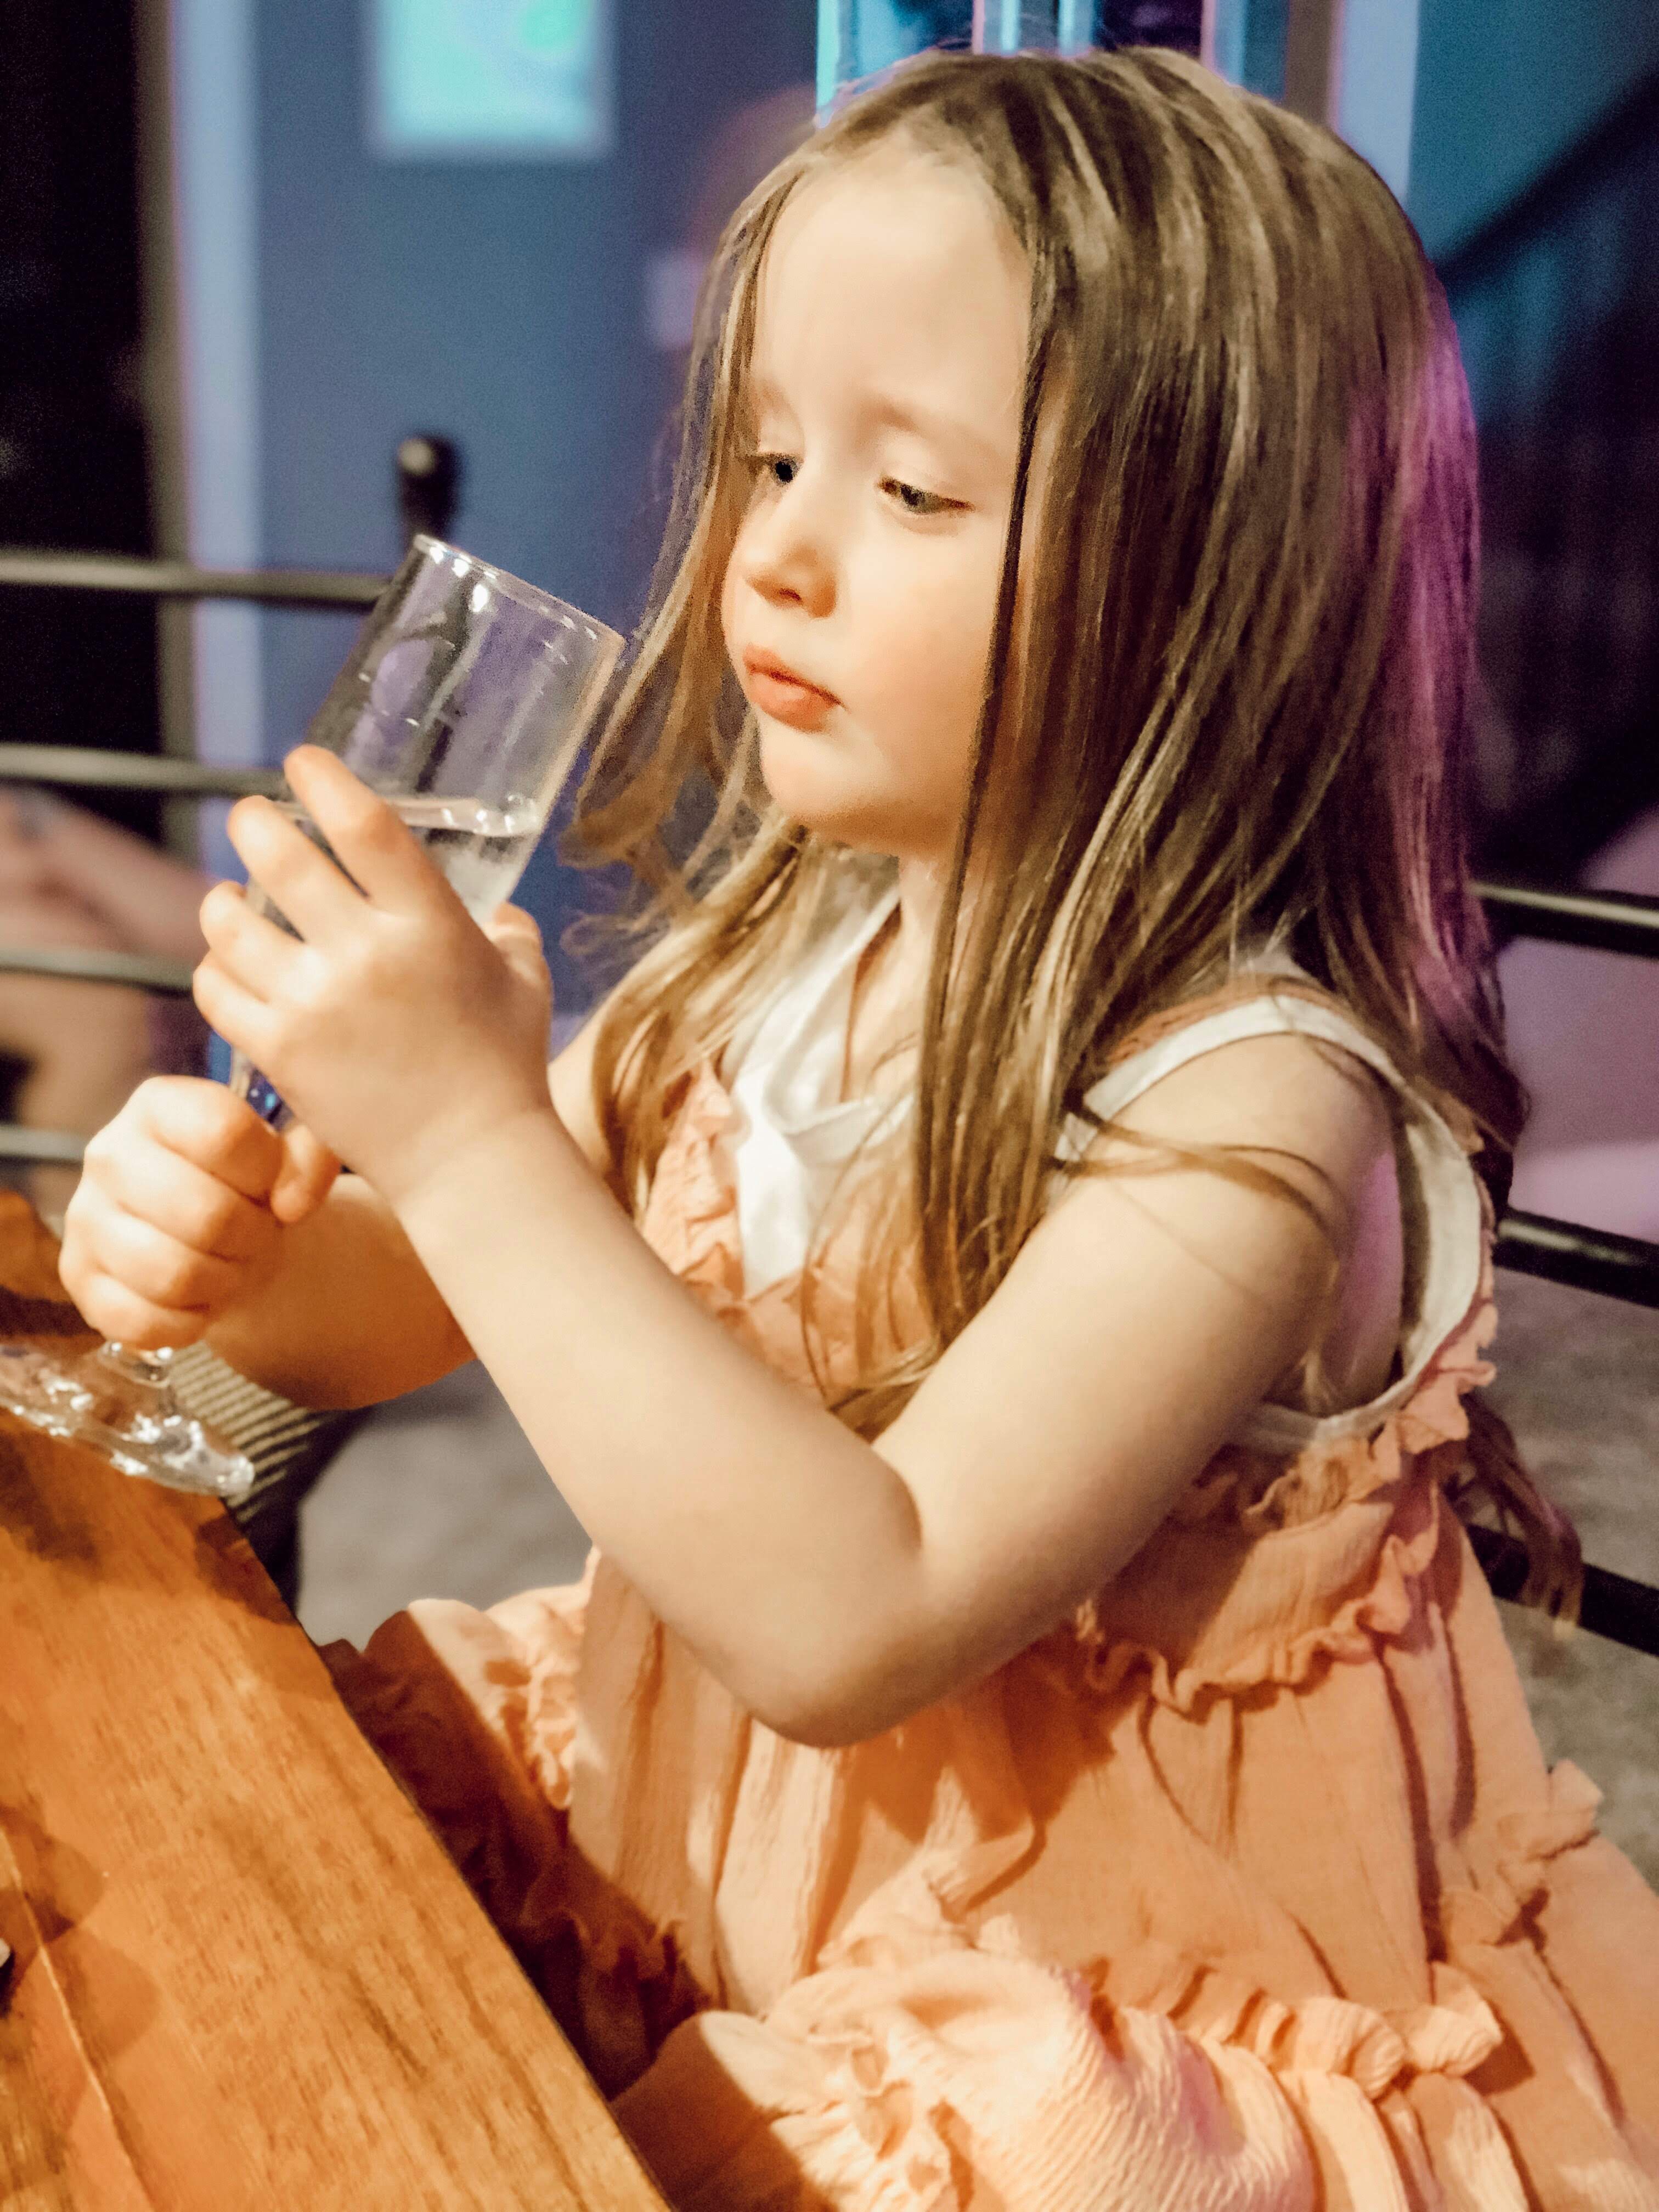 Child drinking water to eliminate toxins